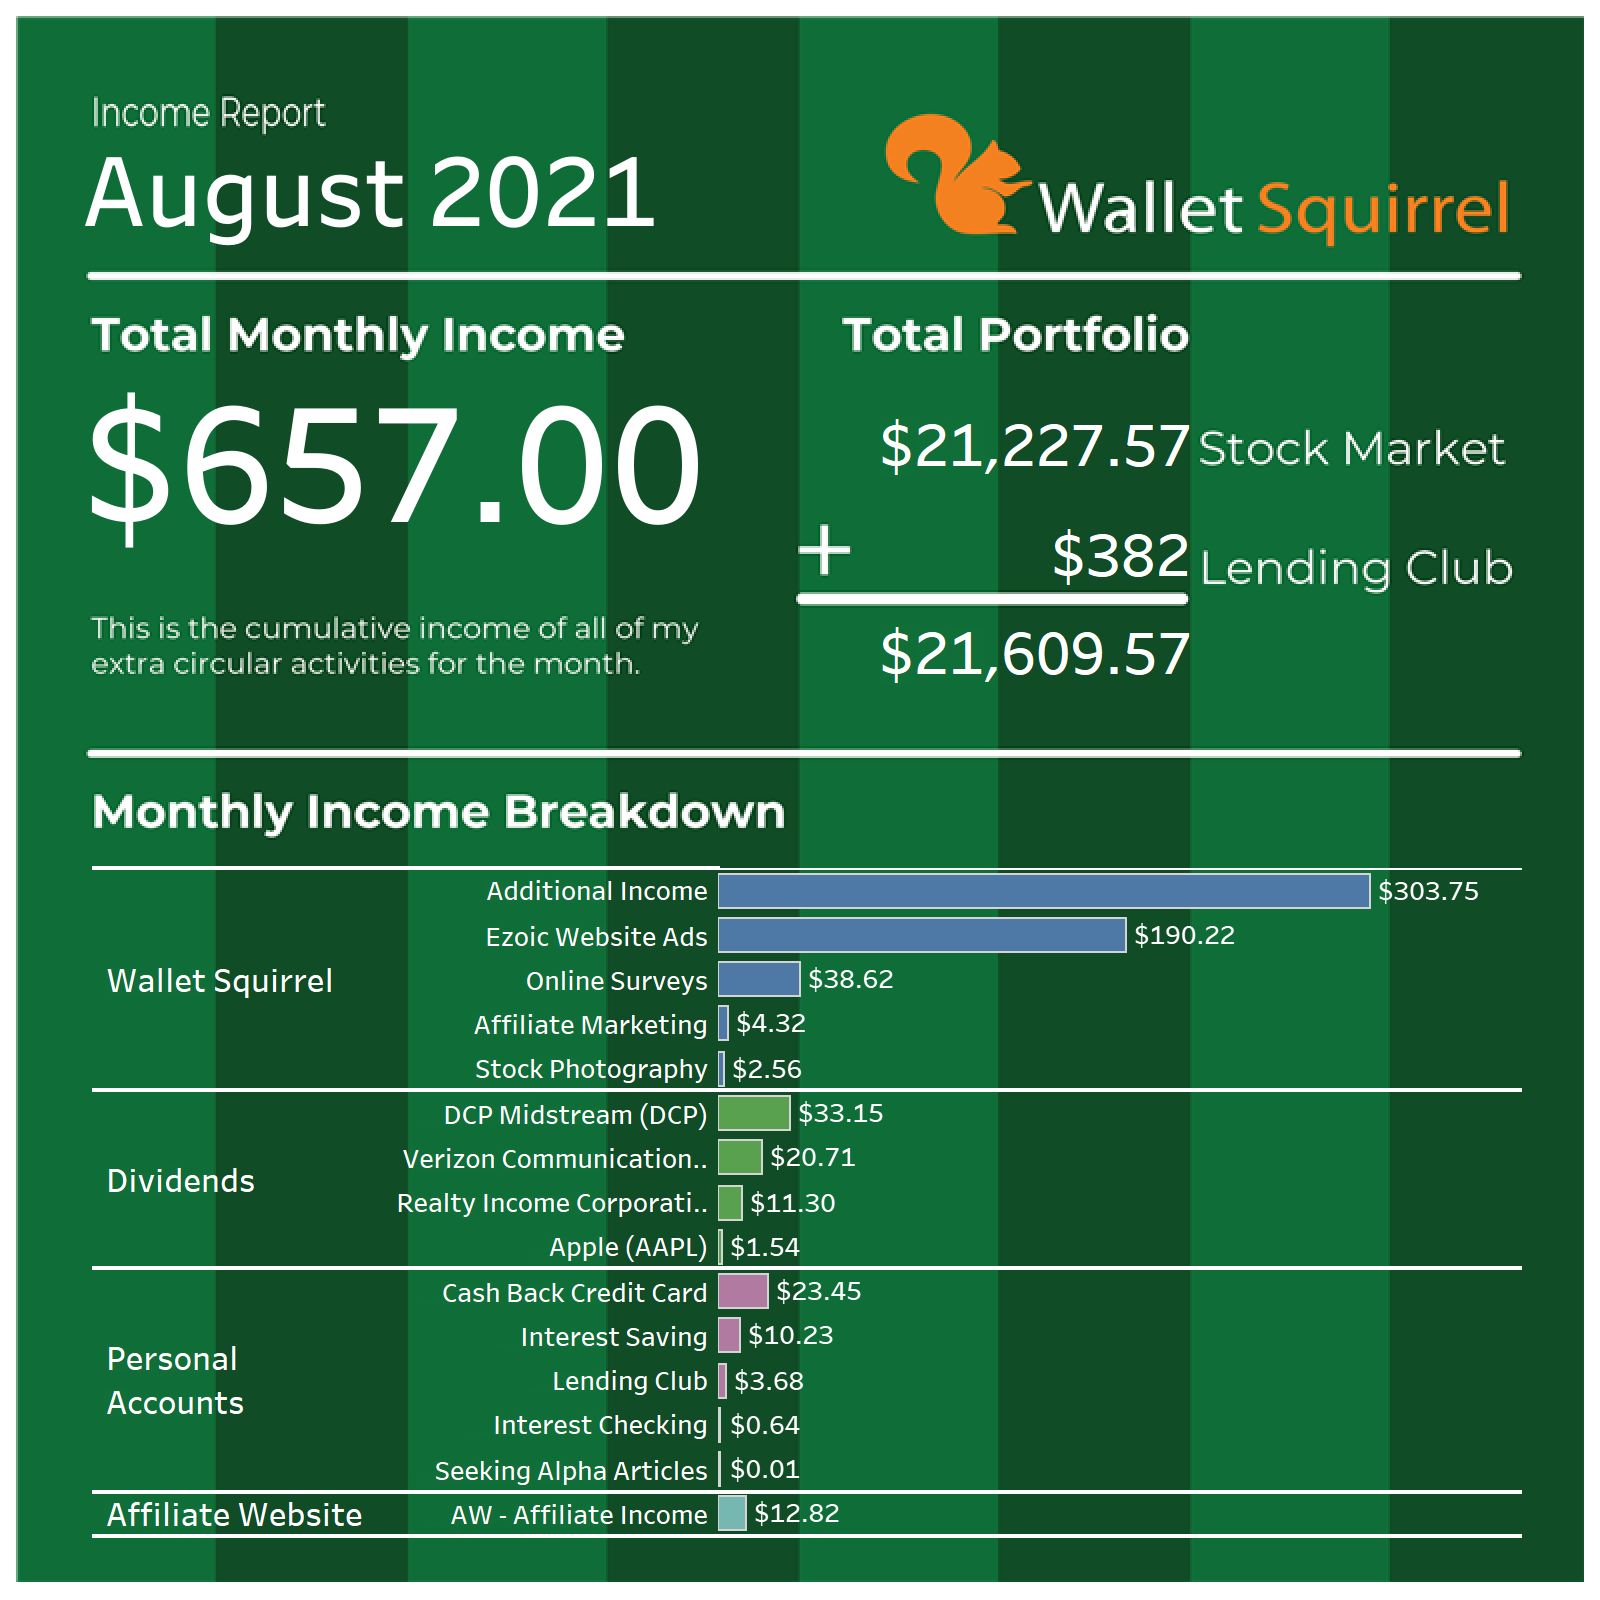 August-2021-Wallet-Squirel-Income-Report-Infographic